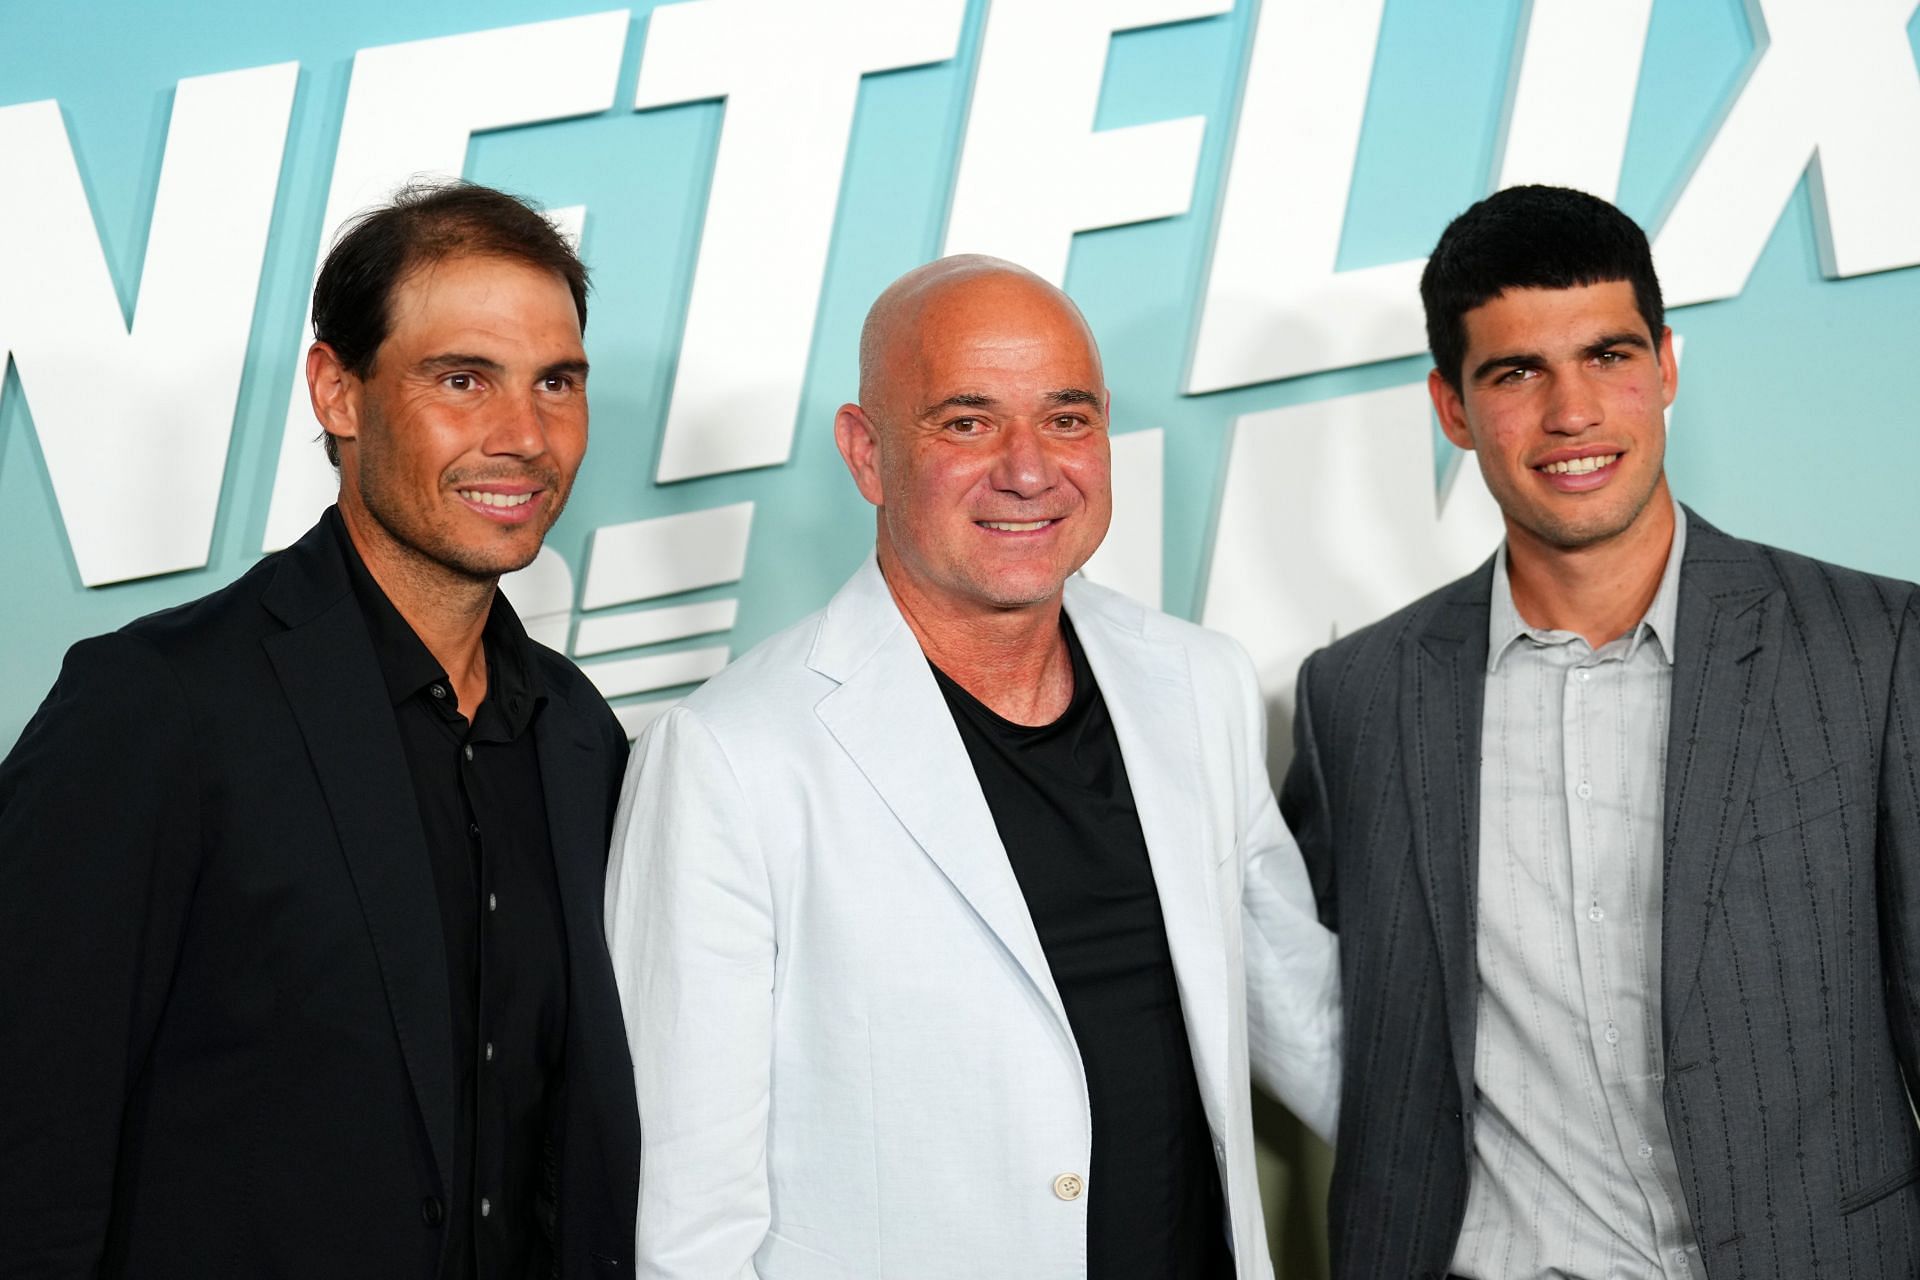 “2 amazing legends and 1 that is on his way to join them” - Rafael Nadal, Andre Agassi & Carlos Alcaraz meeting up ahead of Netflix Slam delights fans